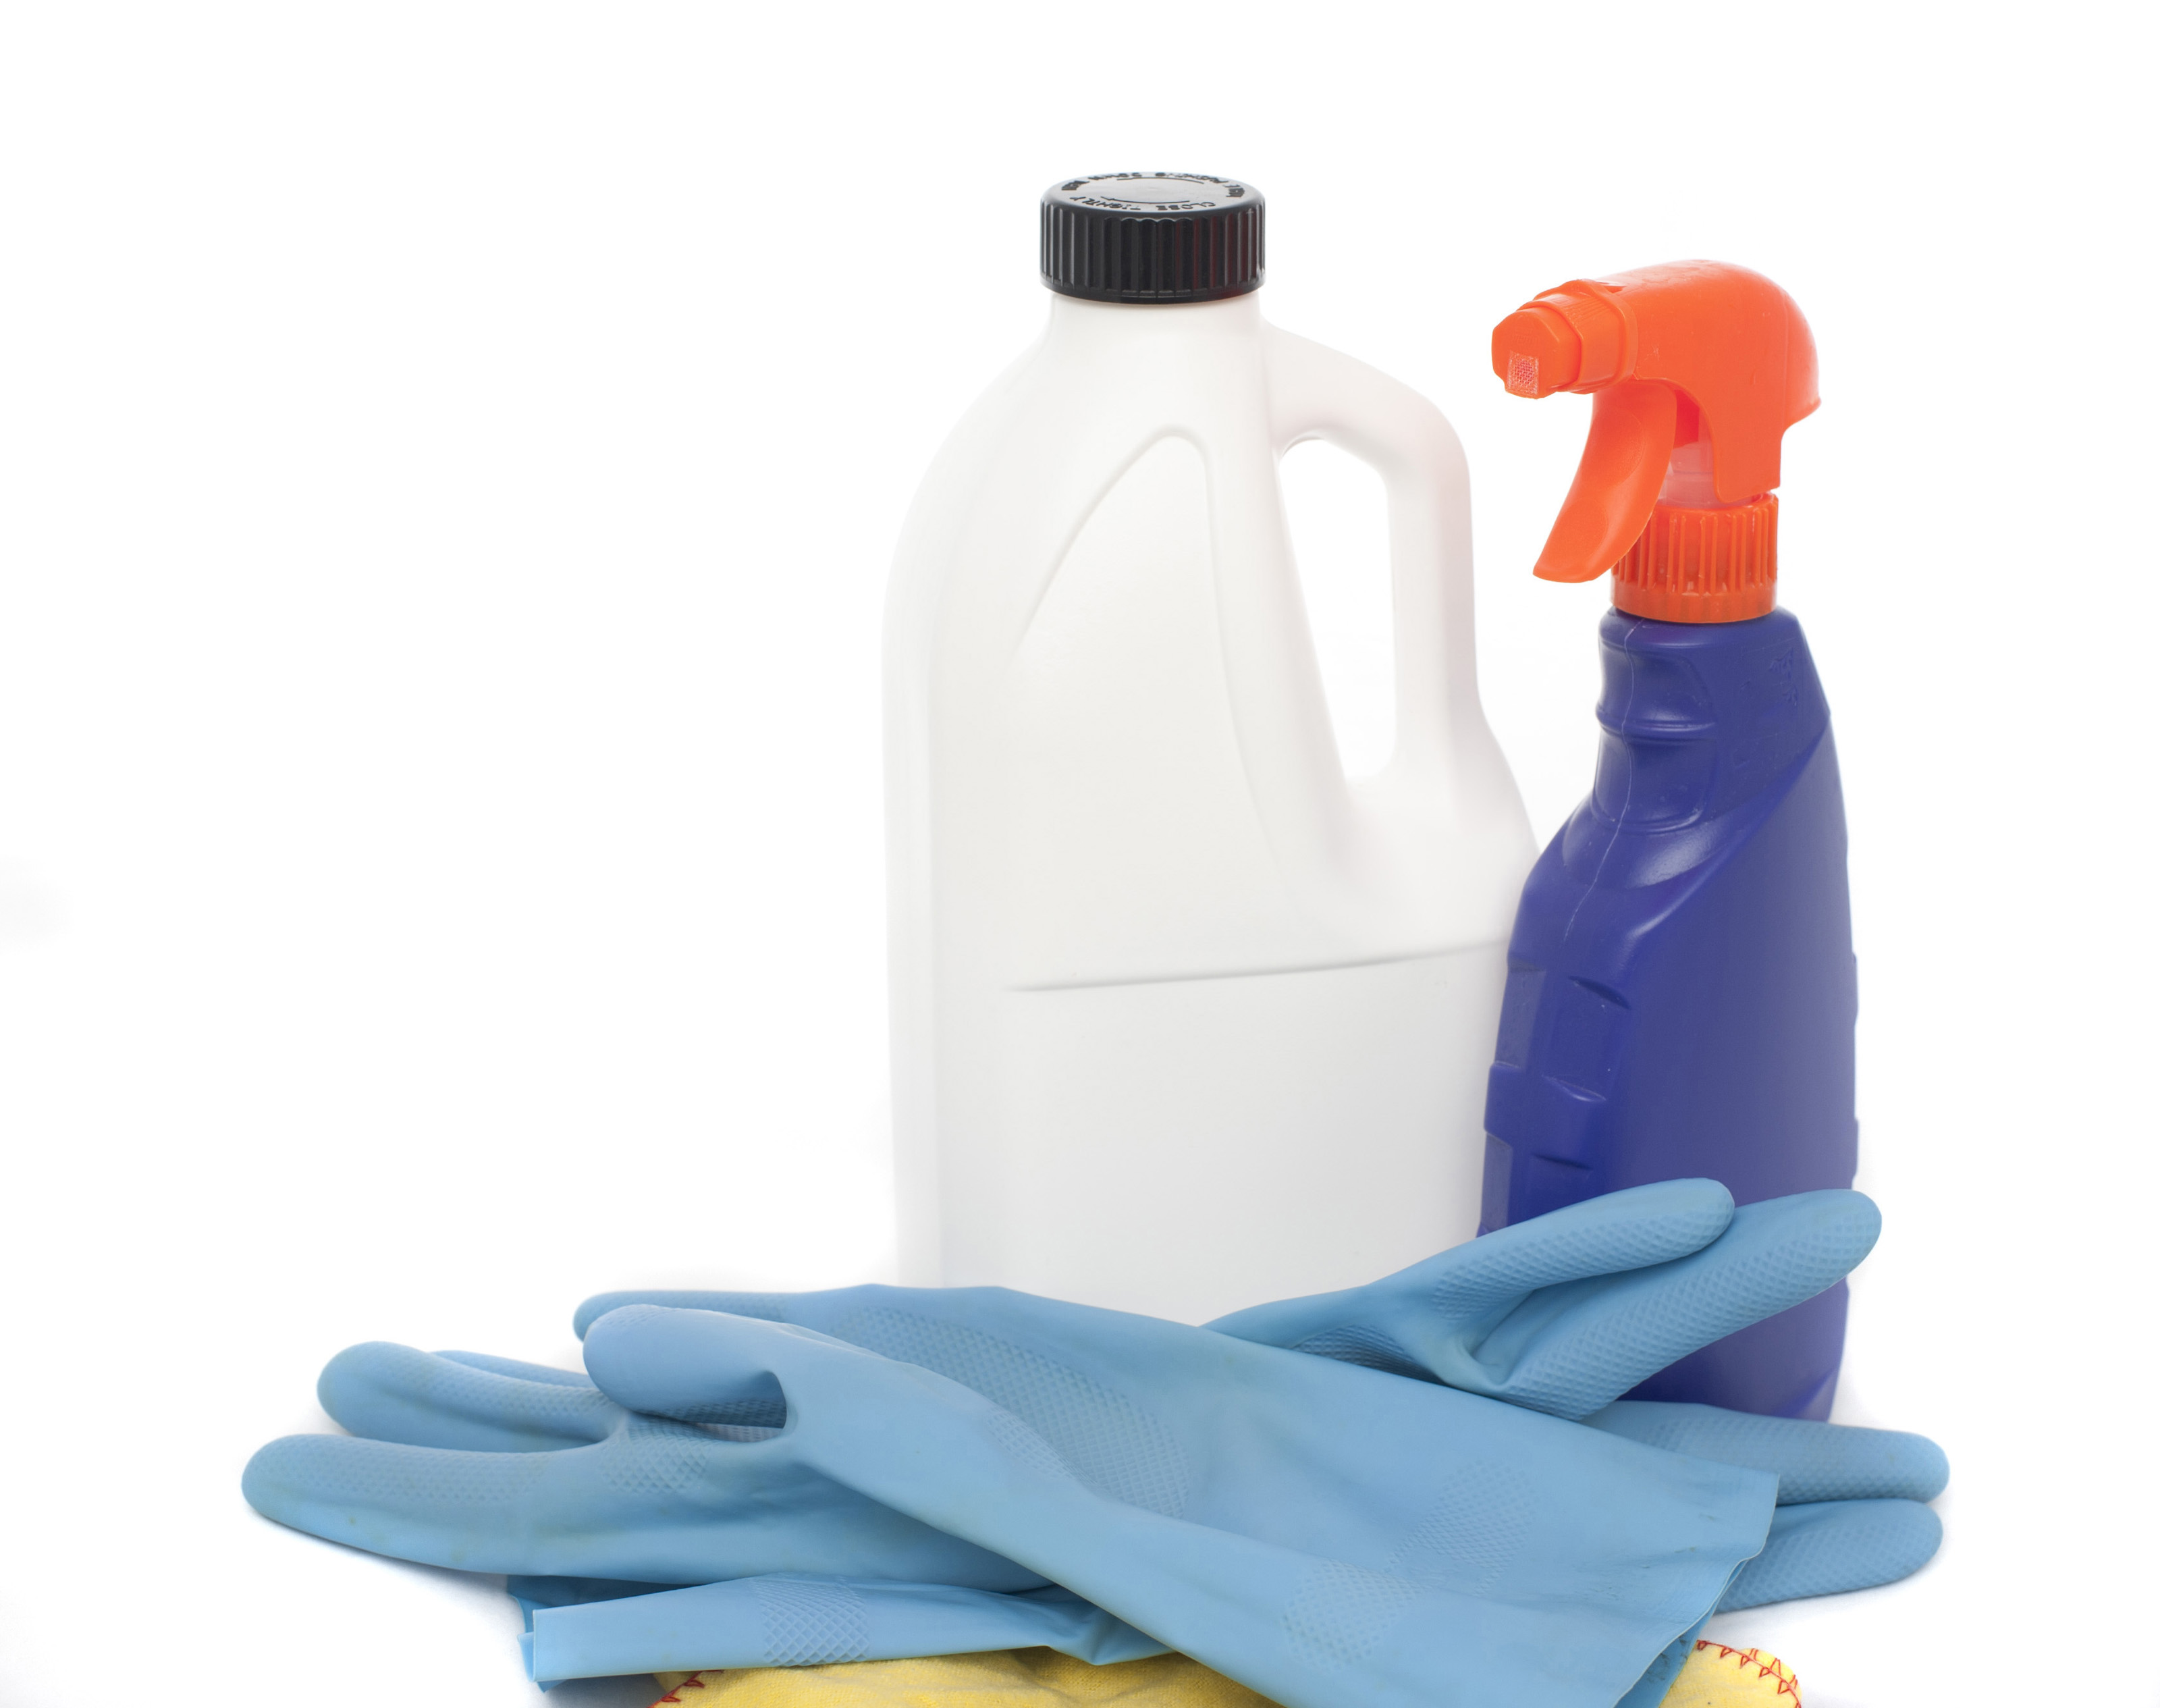 Free Stock Photo 6902 Household cleaning products | freeimageslive